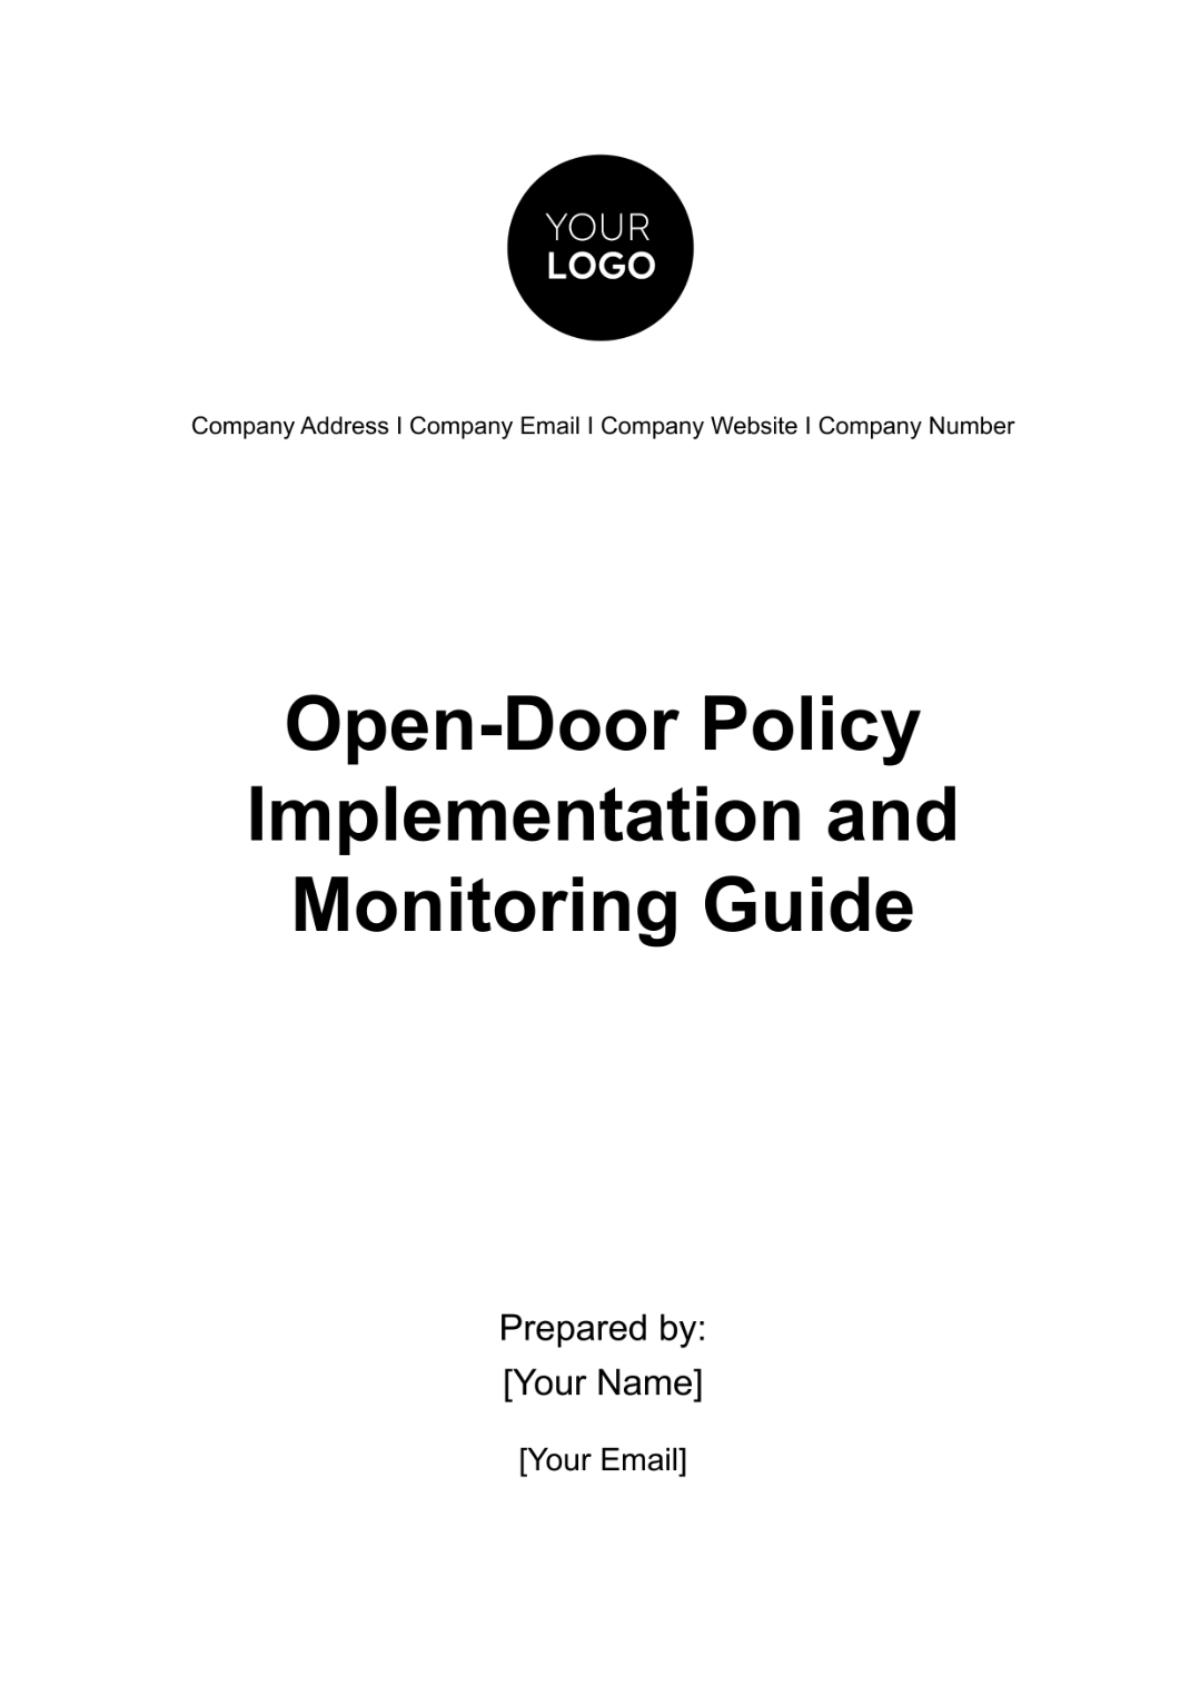 Free Open-door Policy Implementation and Monitoring Guide HR Template